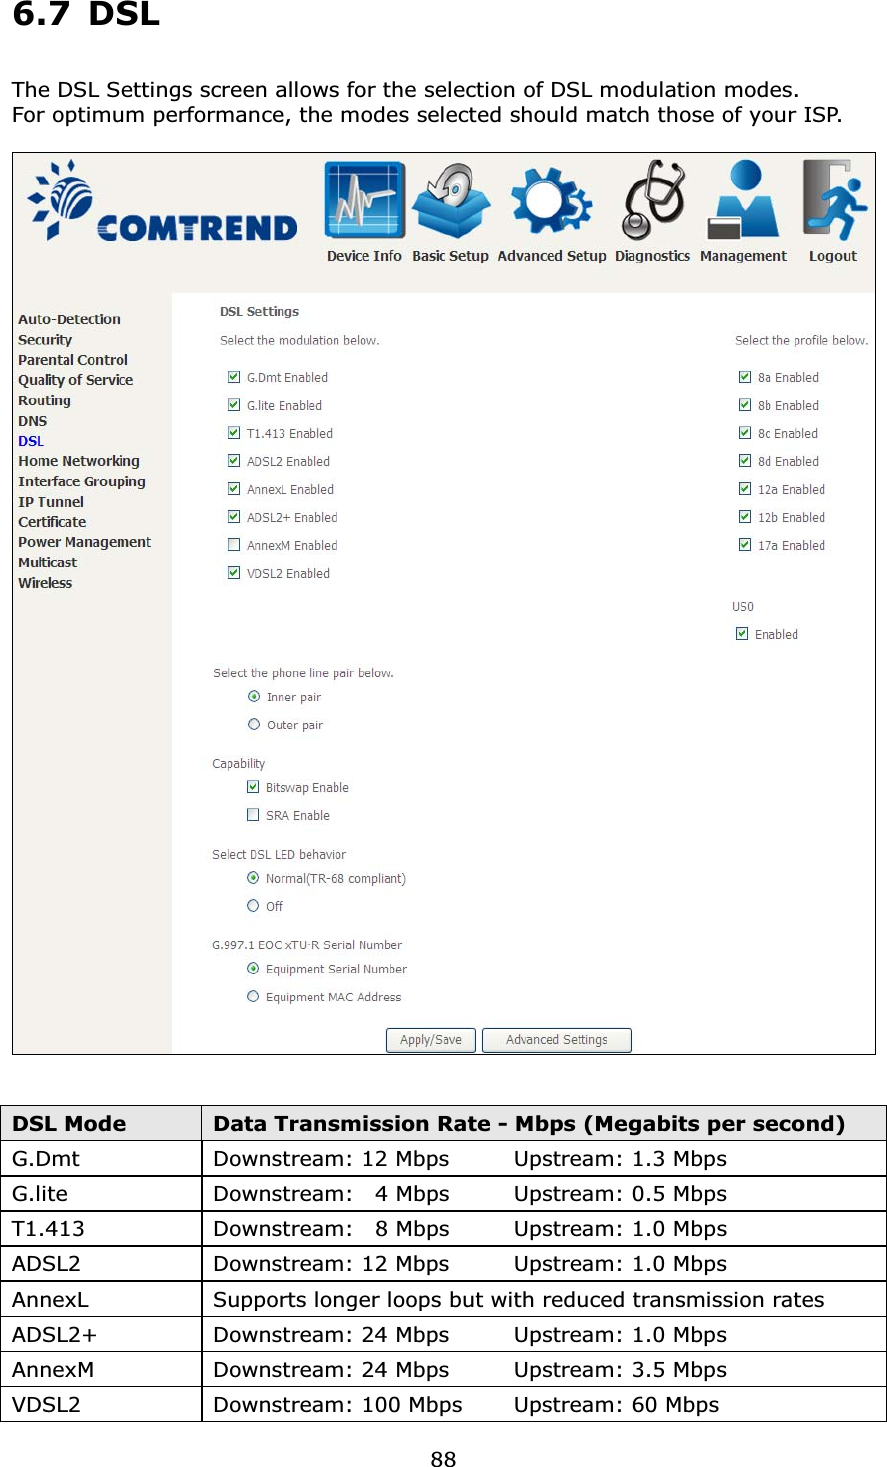 886.7 DSLThe DSL Settings screen allows for the selection of DSL modulation modes.   For optimum performance, the modes selected should match those of your ISP.DSL Mode Data Transmission Rate - Mbps (Megabits per second)G.Dmt Downstream: 12 Mbps Upstream: 1.3 MbpsG.lite Downstream:  4 Mbps Upstream: 0.5 MbpsT1.413 Downstream:  8 Mbps Upstream: 1.0 MbpsADSL2  Downstream: 12 Mbps Upstream: 1.0 MbpsAnnexL  Supports longer loops but with reduced transmission ratesADSL2+  Downstream: 24 Mbps Upstream: 1.0 MbpsAnnexM  Downstream: 24 Mbps Upstream: 3.5 MbpsVDSL2 Downstream: 100 Mbps Upstream: 60 Mbps